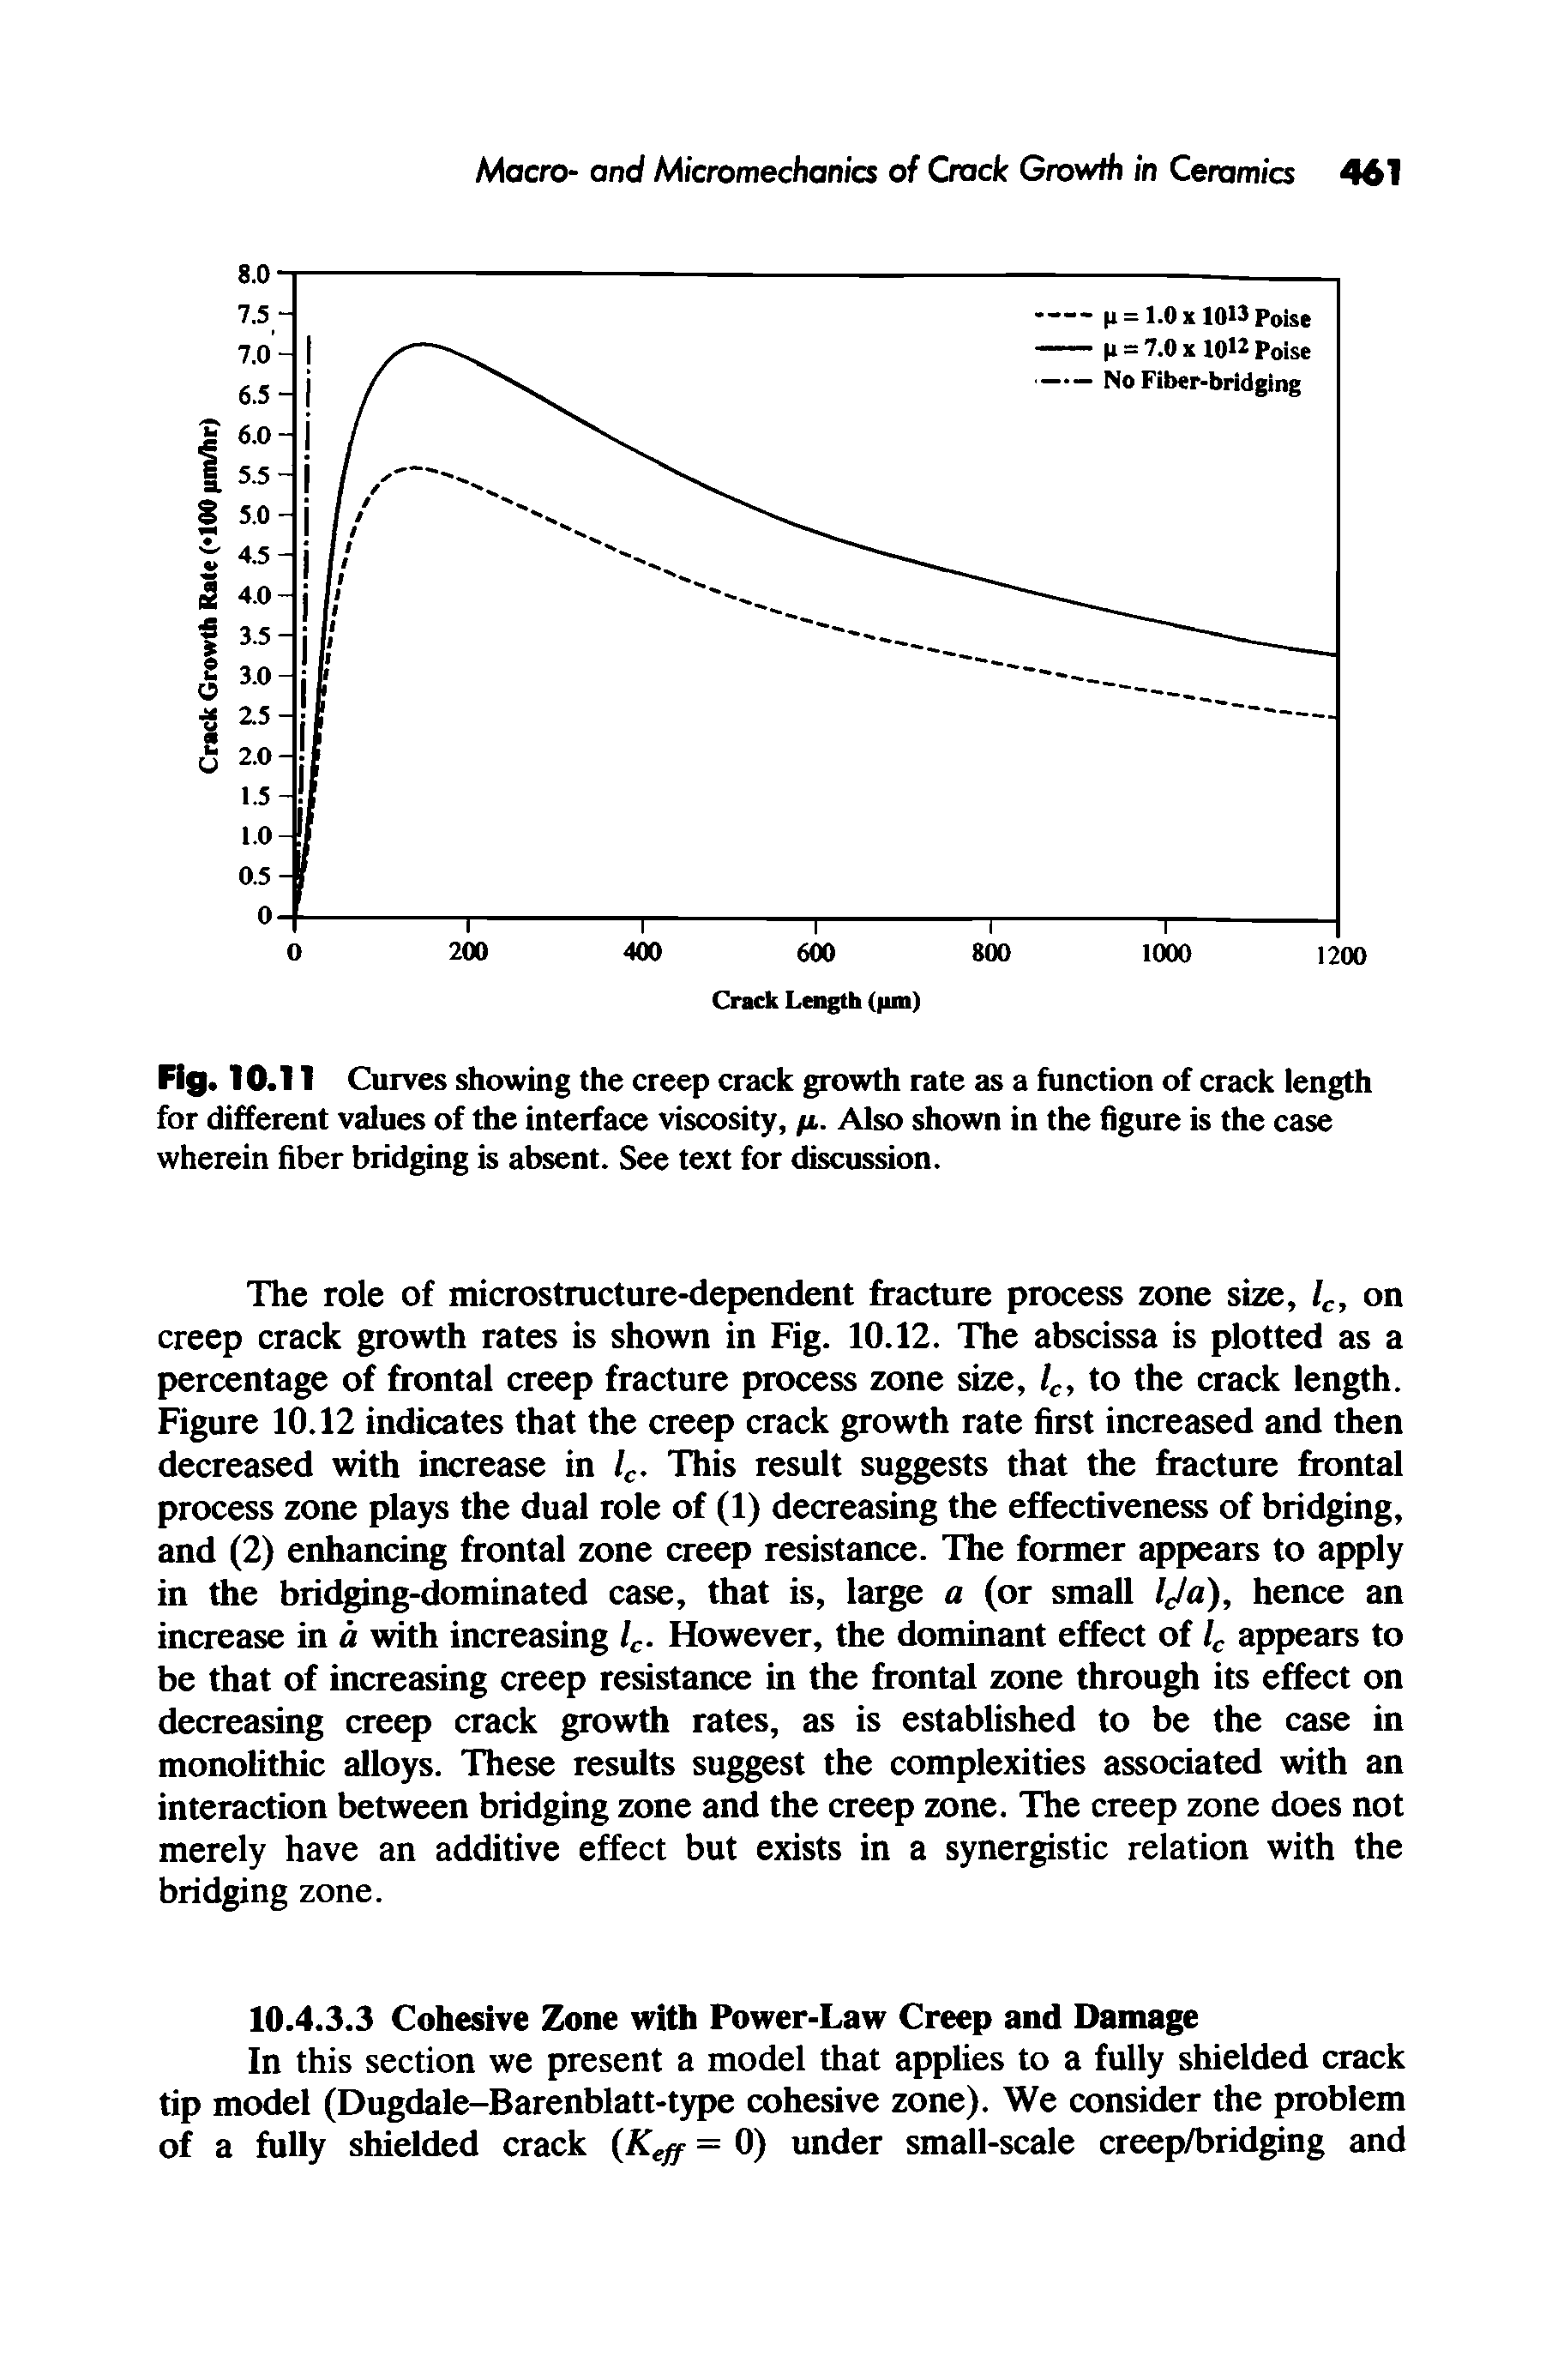 Fig. 10.11 Curves showing the creep crack growth rate as a function of crack length for different values of the interface viscosity, /. Also shown in the figure is the case wherein fiber bridging is absent. See text for discussion.